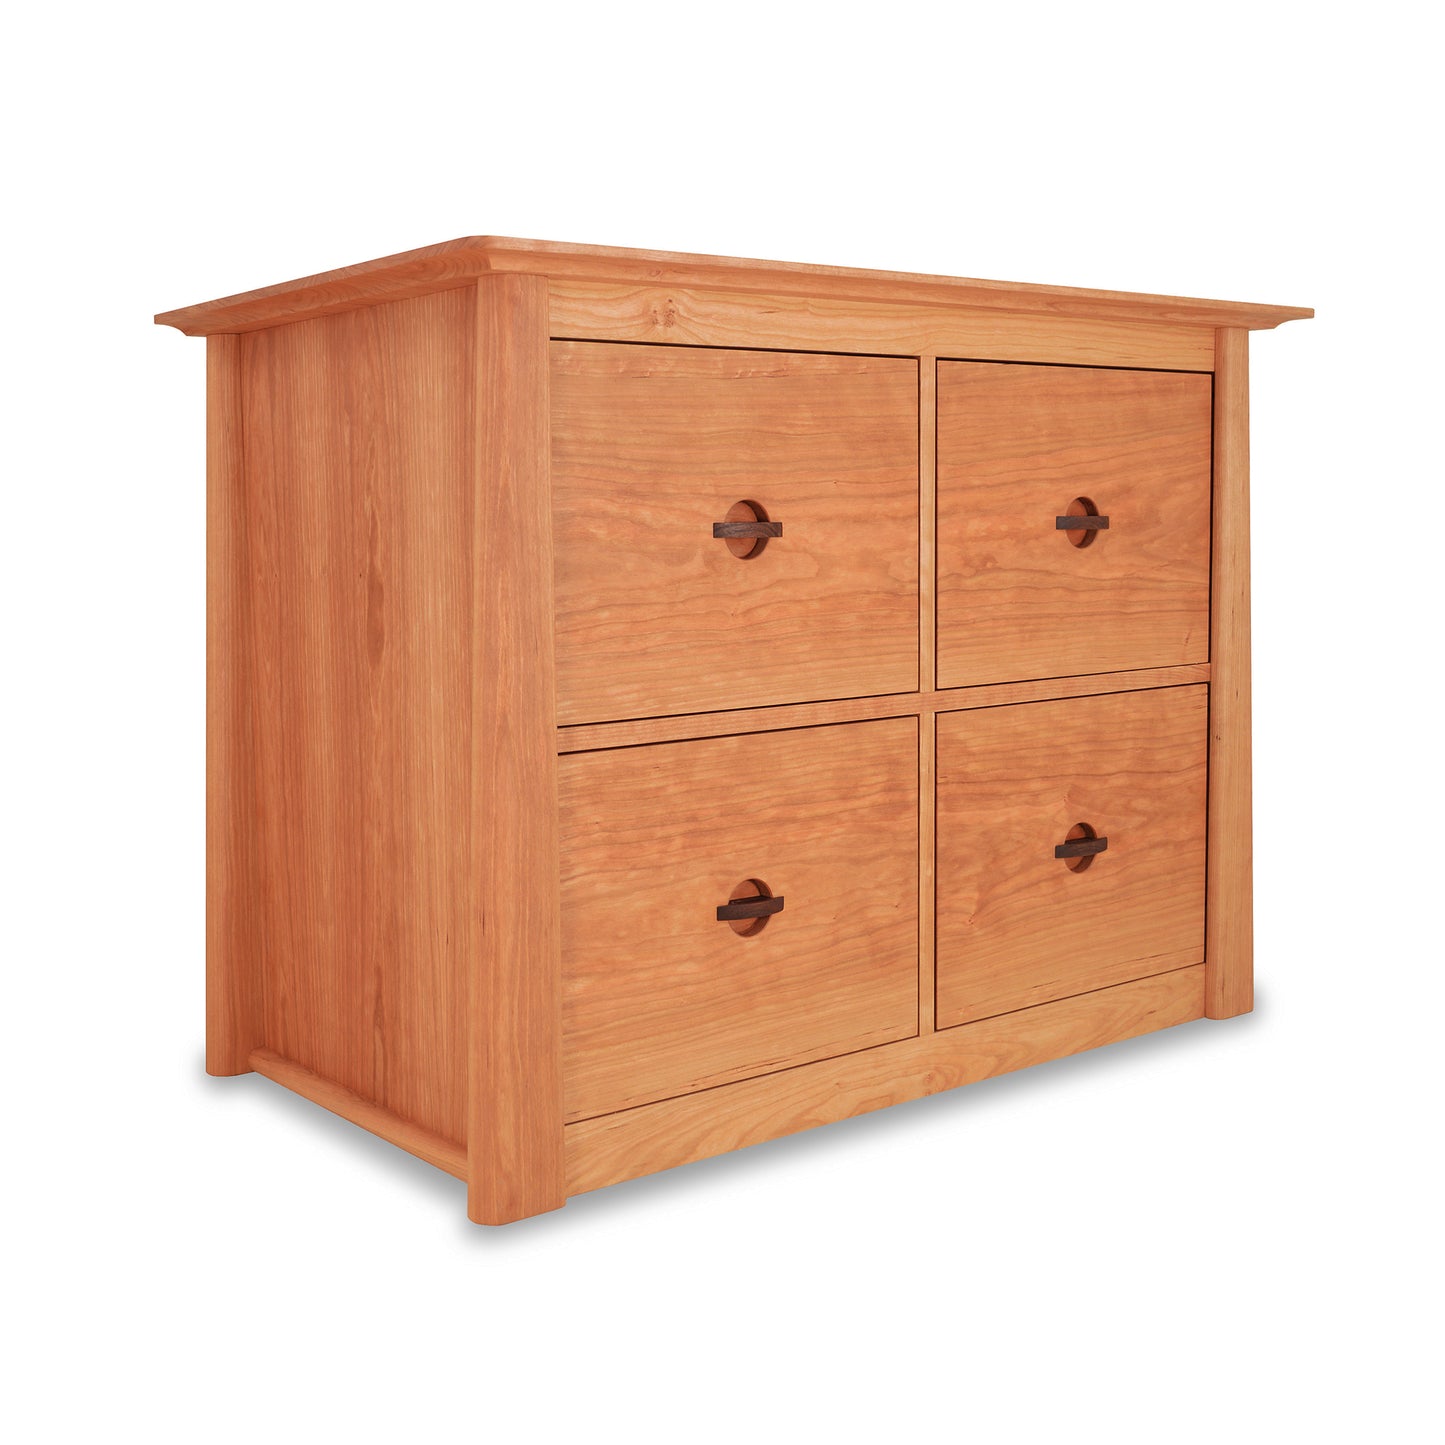 Cherry Moon 4-Drawer File Credenza by Maple Corner Woodworks isolated on a white background.